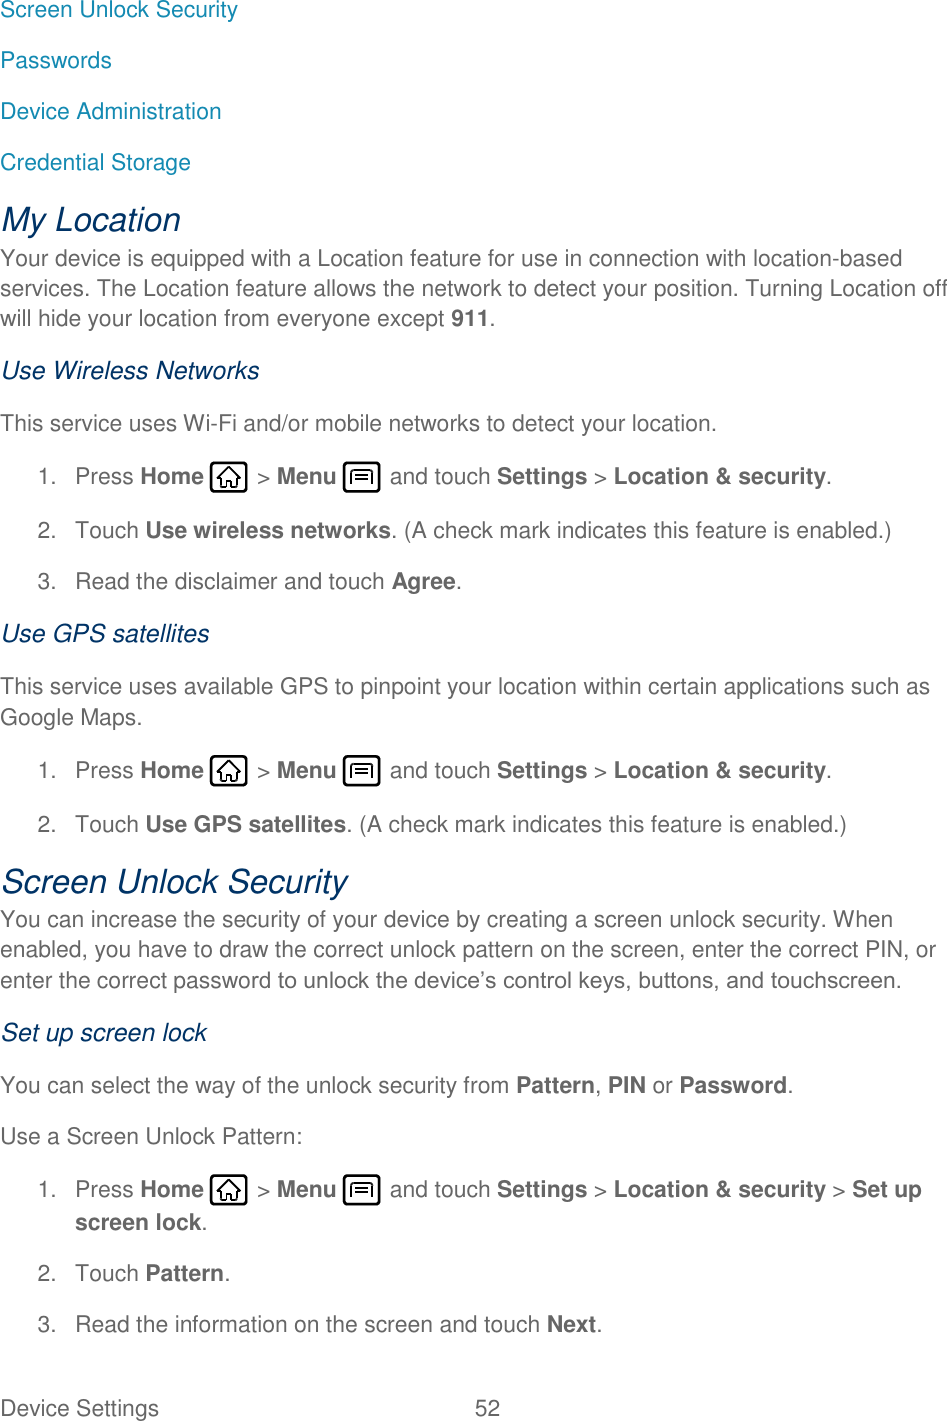 Device Settings  52   Screen Unlock Security Passwords Device Administration Credential Storage My Location Your device is equipped with a Location feature for use in connection with location-based services. The Location feature allows the network to detect your position. Turning Location off will hide your location from everyone except 911. Use Wireless Networks This service uses Wi-Fi and/or mobile networks to detect your location. 1.  Press Home   &gt; Menu   and touch Settings &gt; Location &amp; security. 2.  Touch Use wireless networks. (A check mark indicates this feature is enabled.) 3.  Read the disclaimer and touch Agree. Use GPS satellites This service uses available GPS to pinpoint your location within certain applications such as Google Maps. 1.  Press Home   &gt; Menu   and touch Settings &gt; Location &amp; security. 2.  Touch Use GPS satellites. (A check mark indicates this feature is enabled.) Screen Unlock Security You can increase the security of your device by creating a screen unlock security. When enabled, you have to draw the correct unlock pattern on the screen, enter the correct PIN, or enter the correct password to unlock the device’s control keys, buttons, and touchscreen. Set up screen lock You can select the way of the unlock security from Pattern, PIN or Password. Use a Screen Unlock Pattern: 1.  Press Home   &gt; Menu   and touch Settings &gt; Location &amp; security &gt; Set up screen lock. 2.  Touch Pattern. 3.  Read the information on the screen and touch Next. 